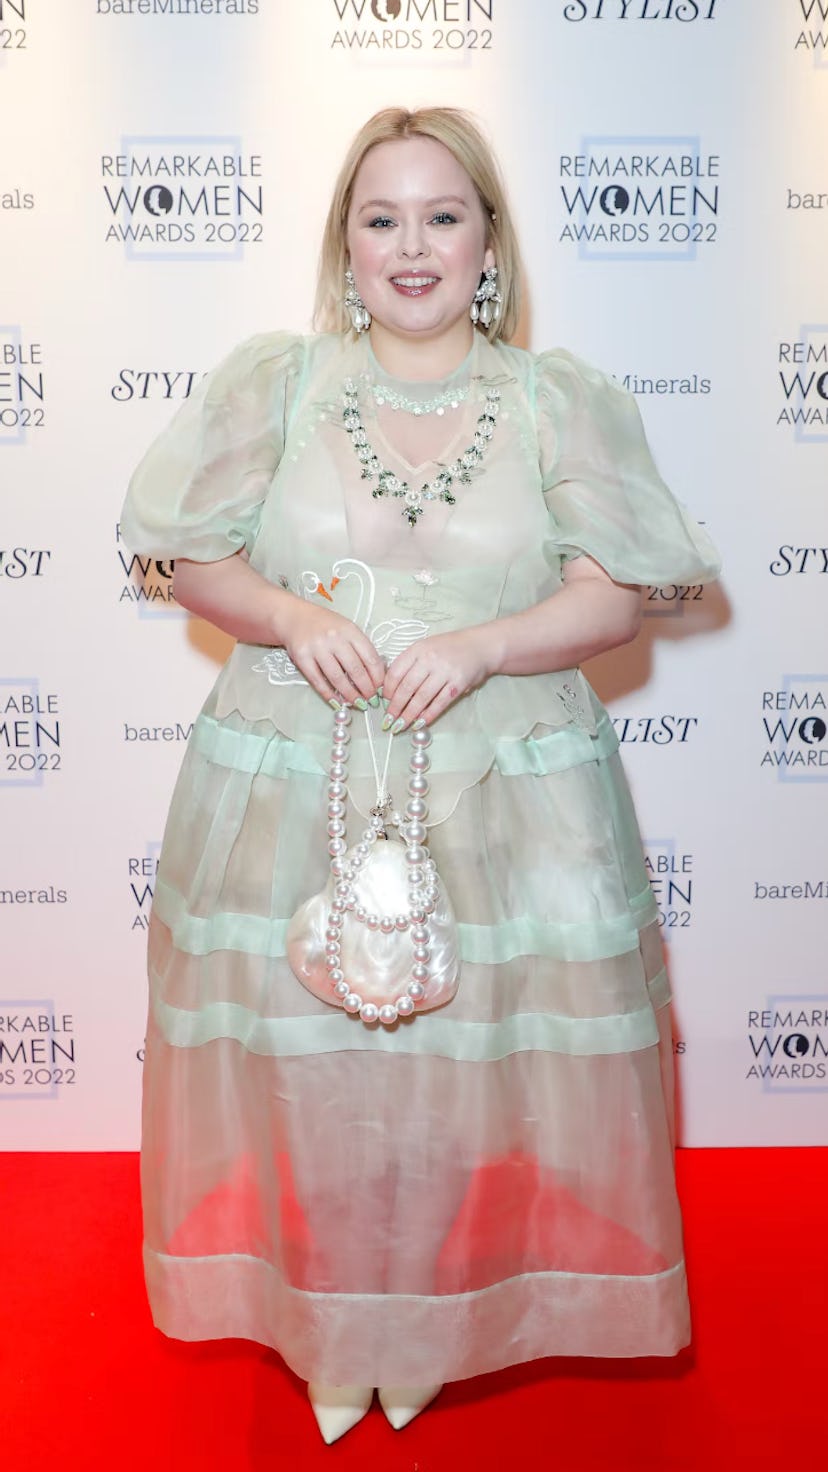 Penelope from Birdgerton, Nicola Mary Coughlan, in a white sheer dress